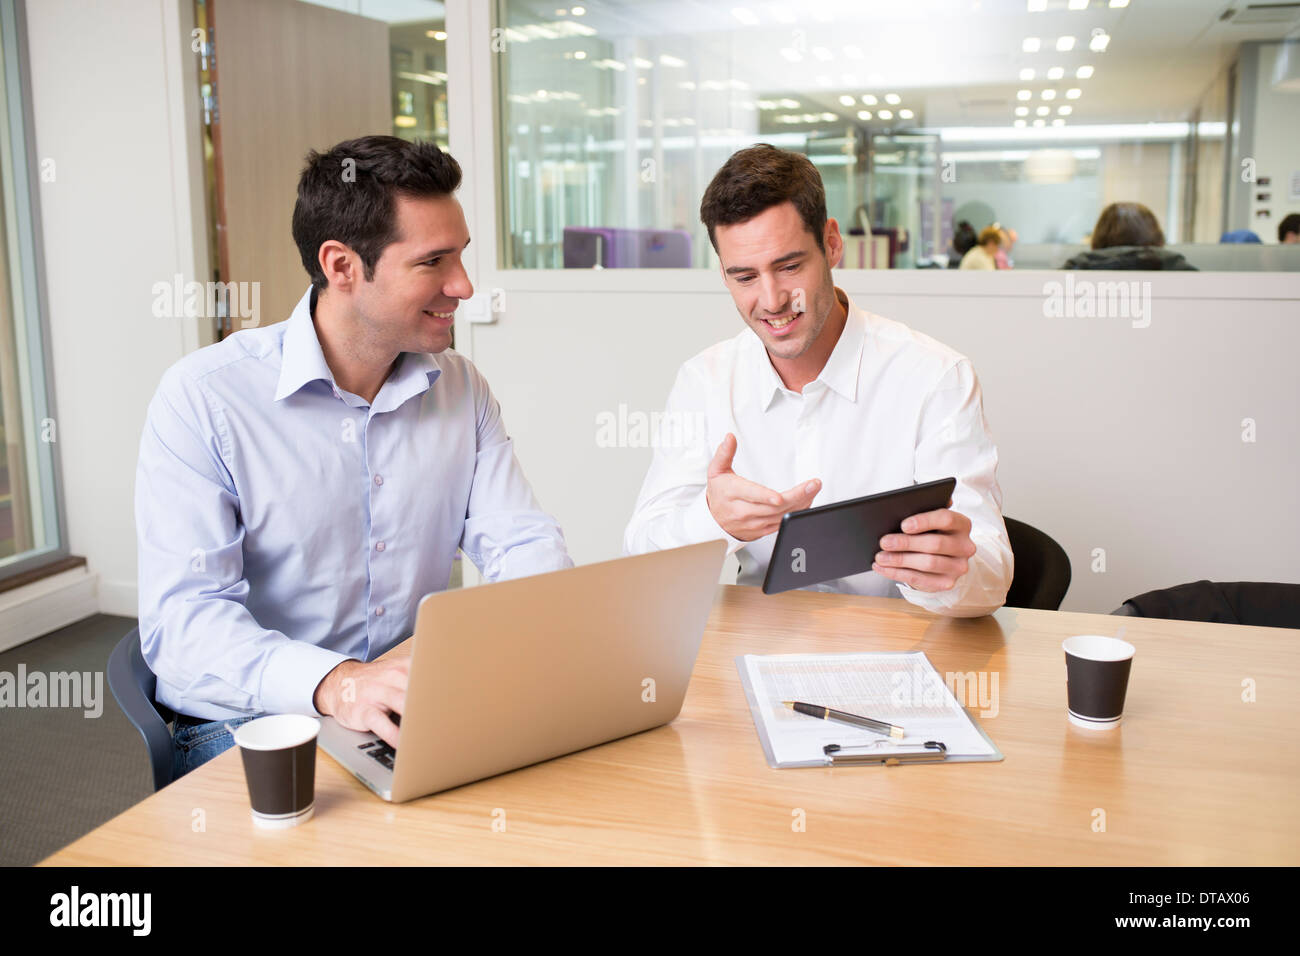 Two casual businessmen working together in office with laptop and tablet pc Stock Photo